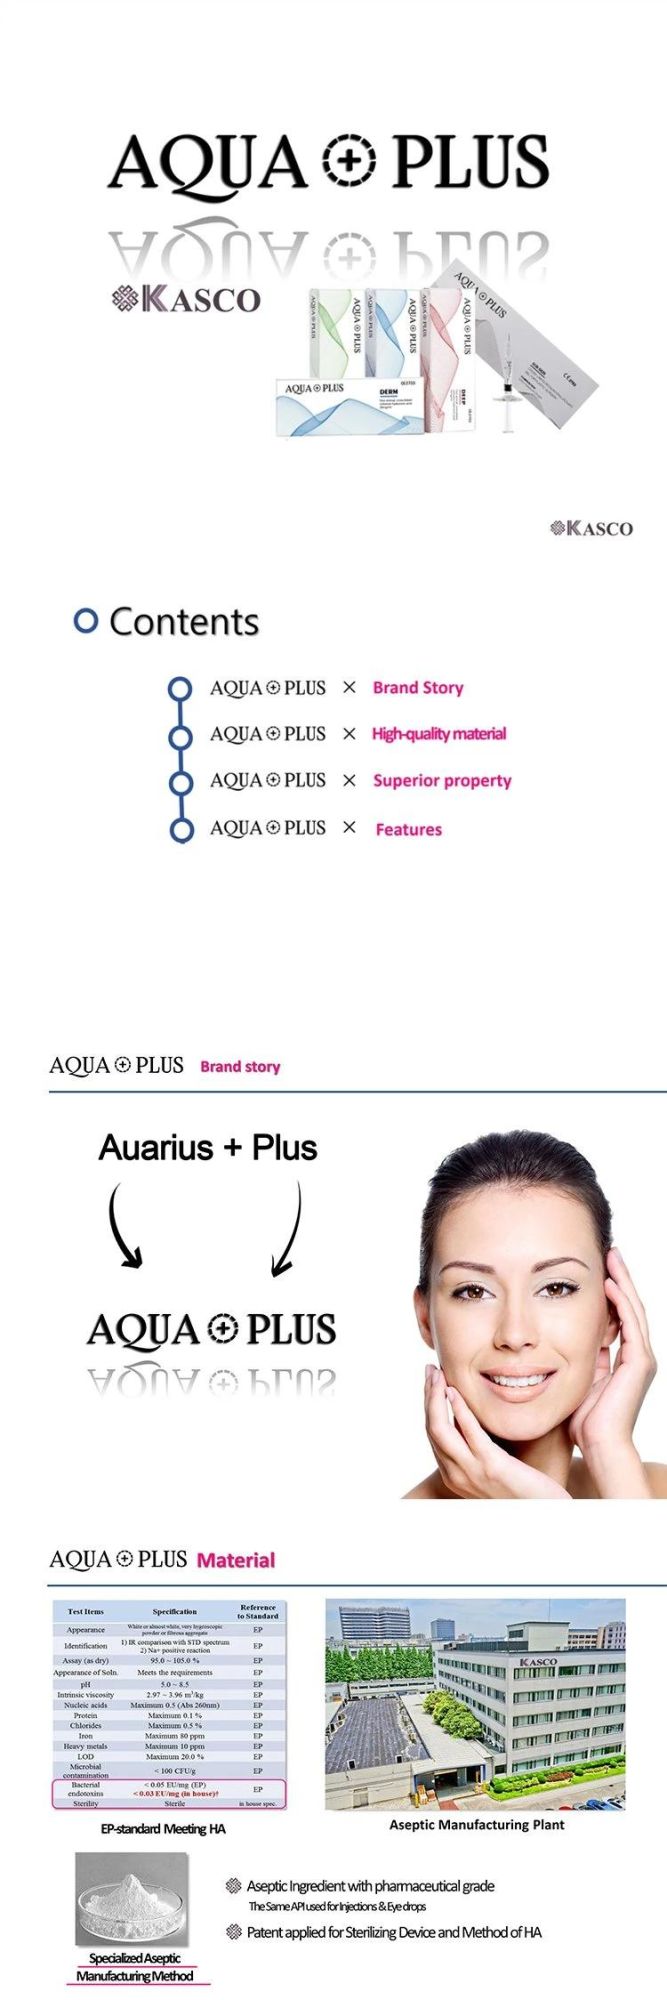 Hong Kong Aqua Plus 1ml 2ml 10ml Available Doses and Face, Lips, Nose, Wrinkles, Contour Use Facial Dermal Filler